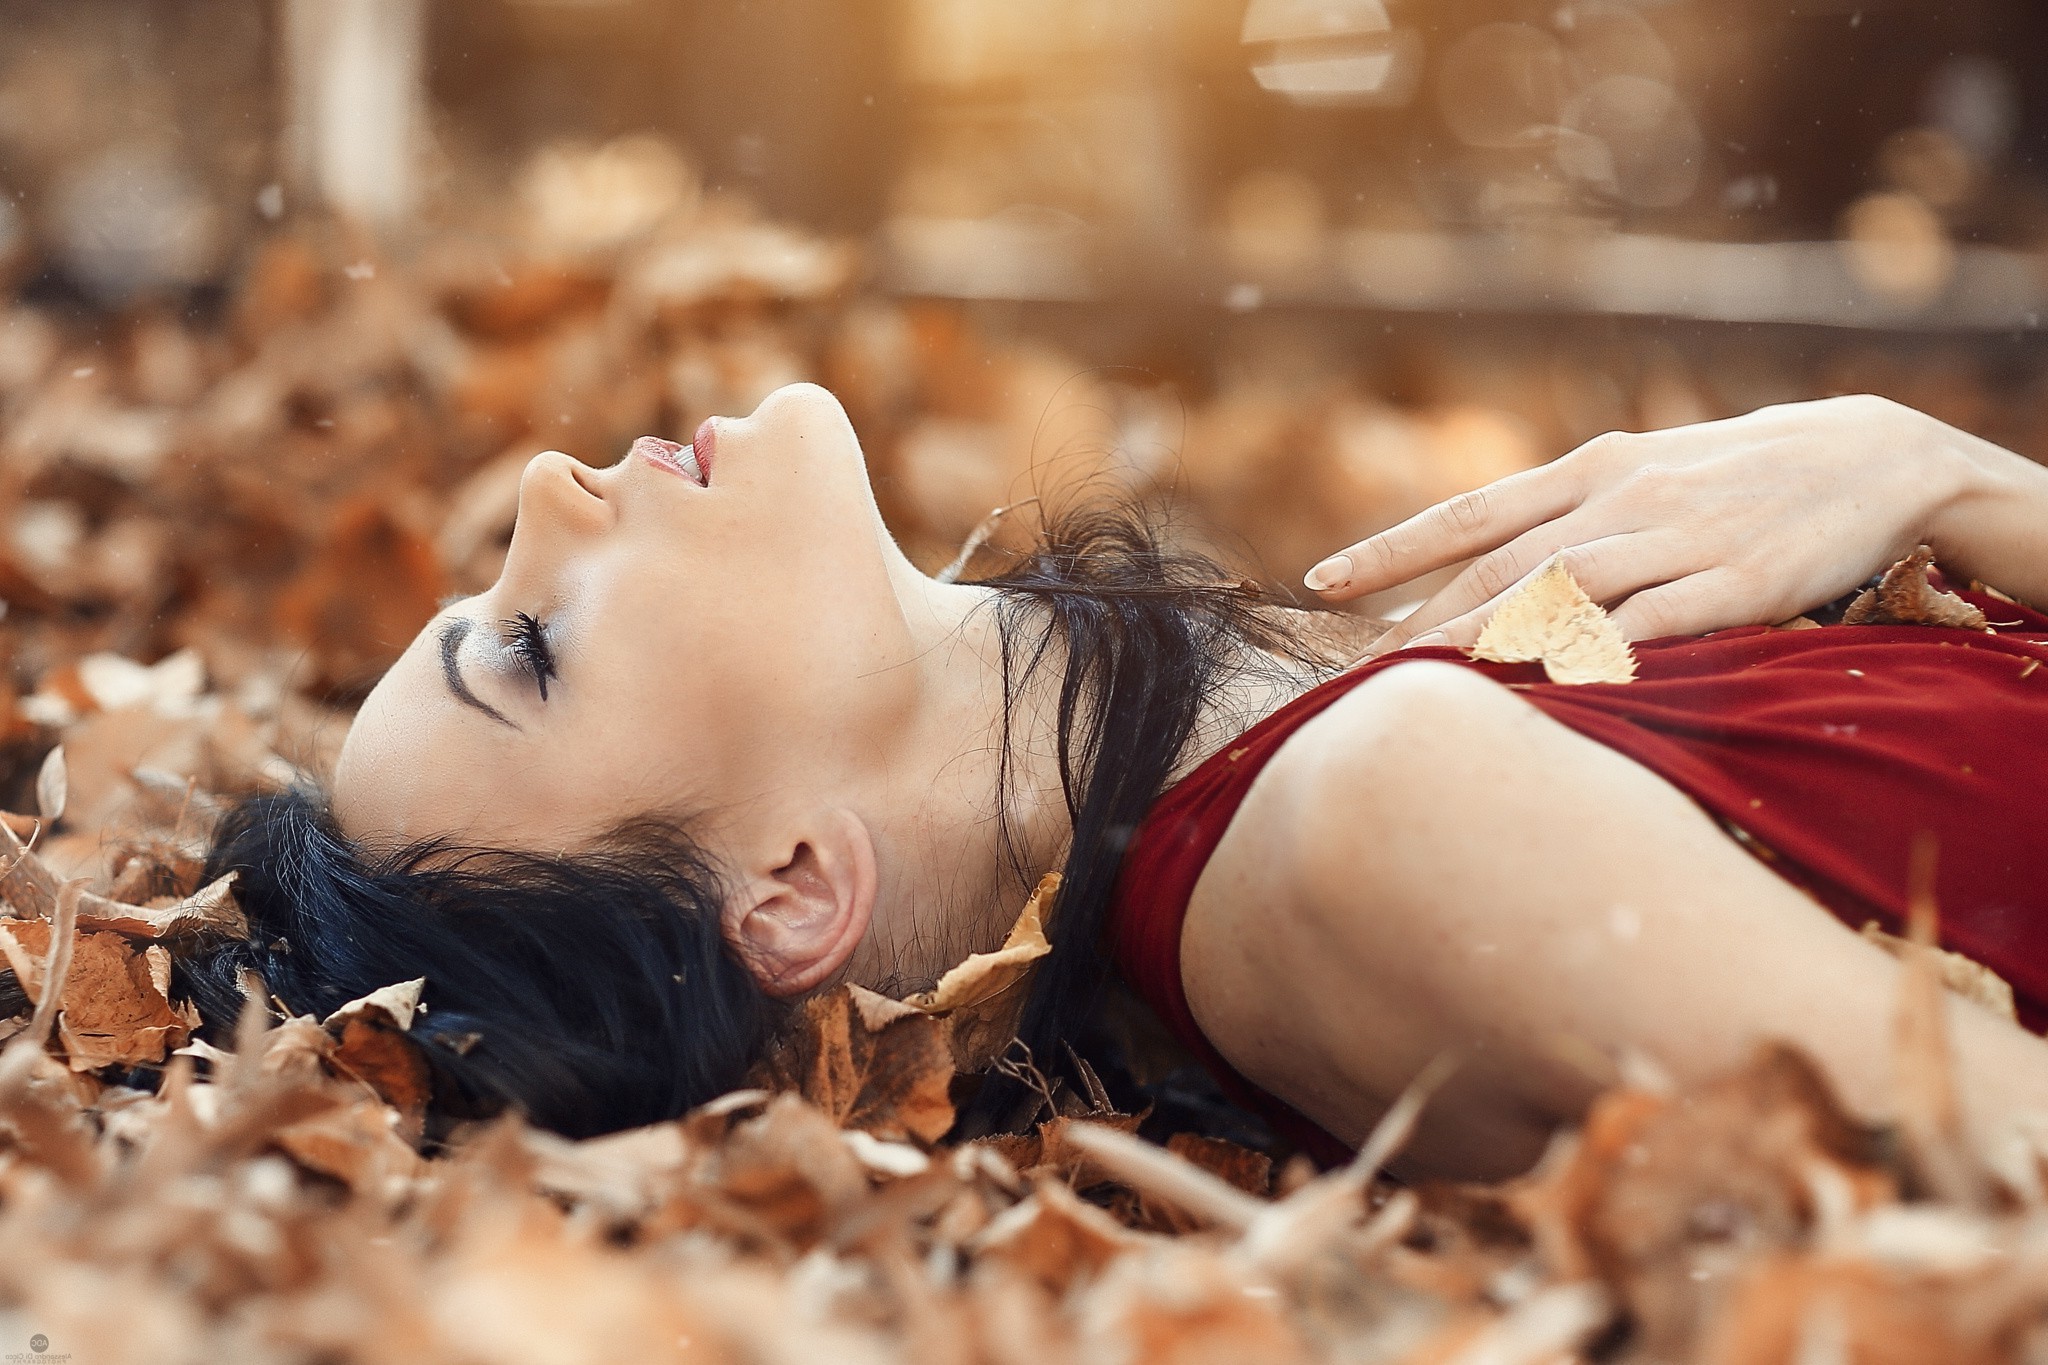 women, Brunette, Black Hair, Red Dress, Leaves, Fall, Closed Eyes, Alessandro Di Cicco Wallpaper